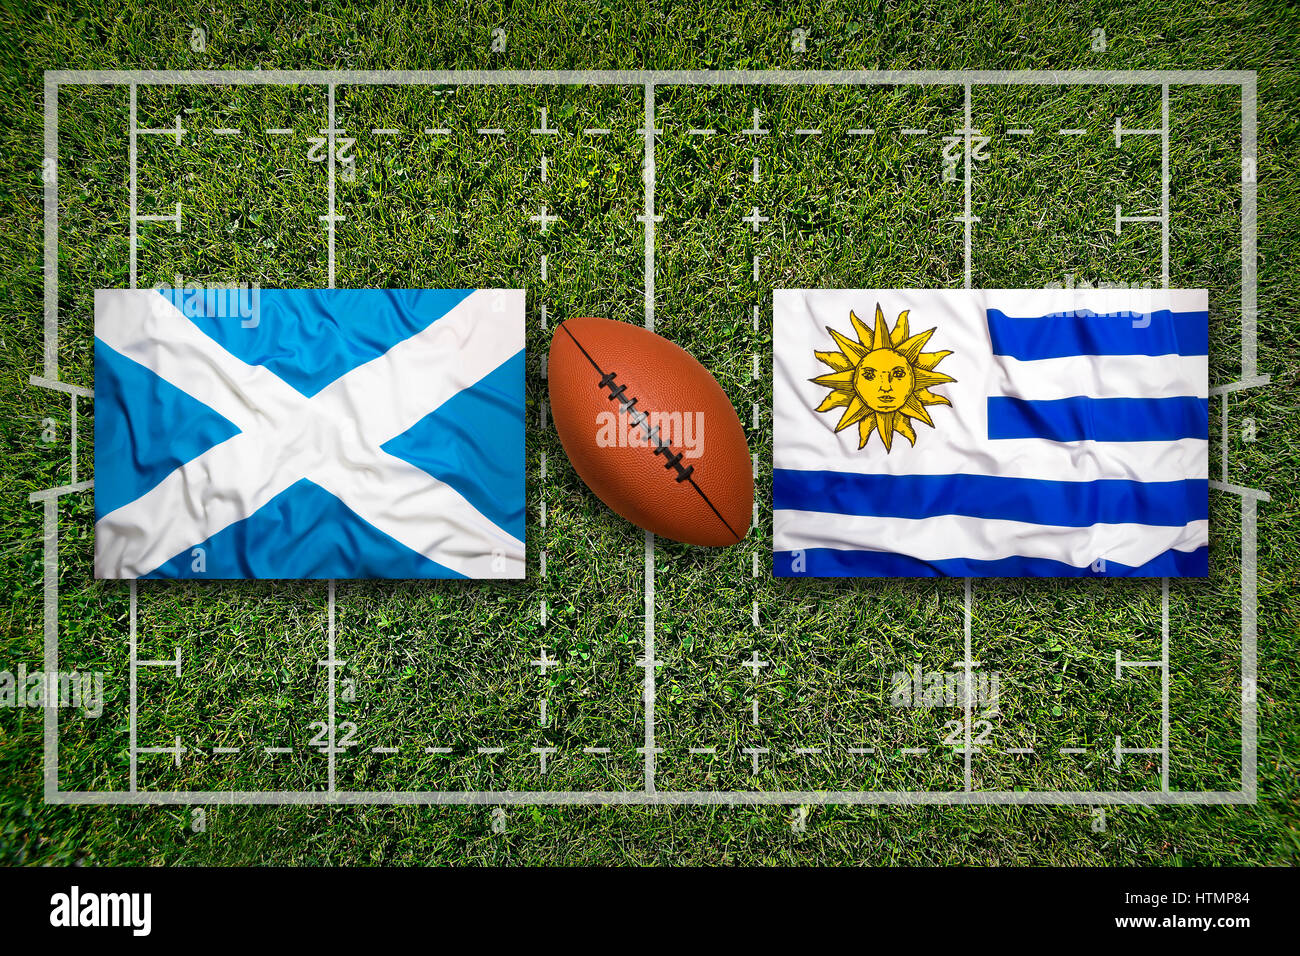 Scotland vs. Uruguay flags on green rugby field Stock Photo